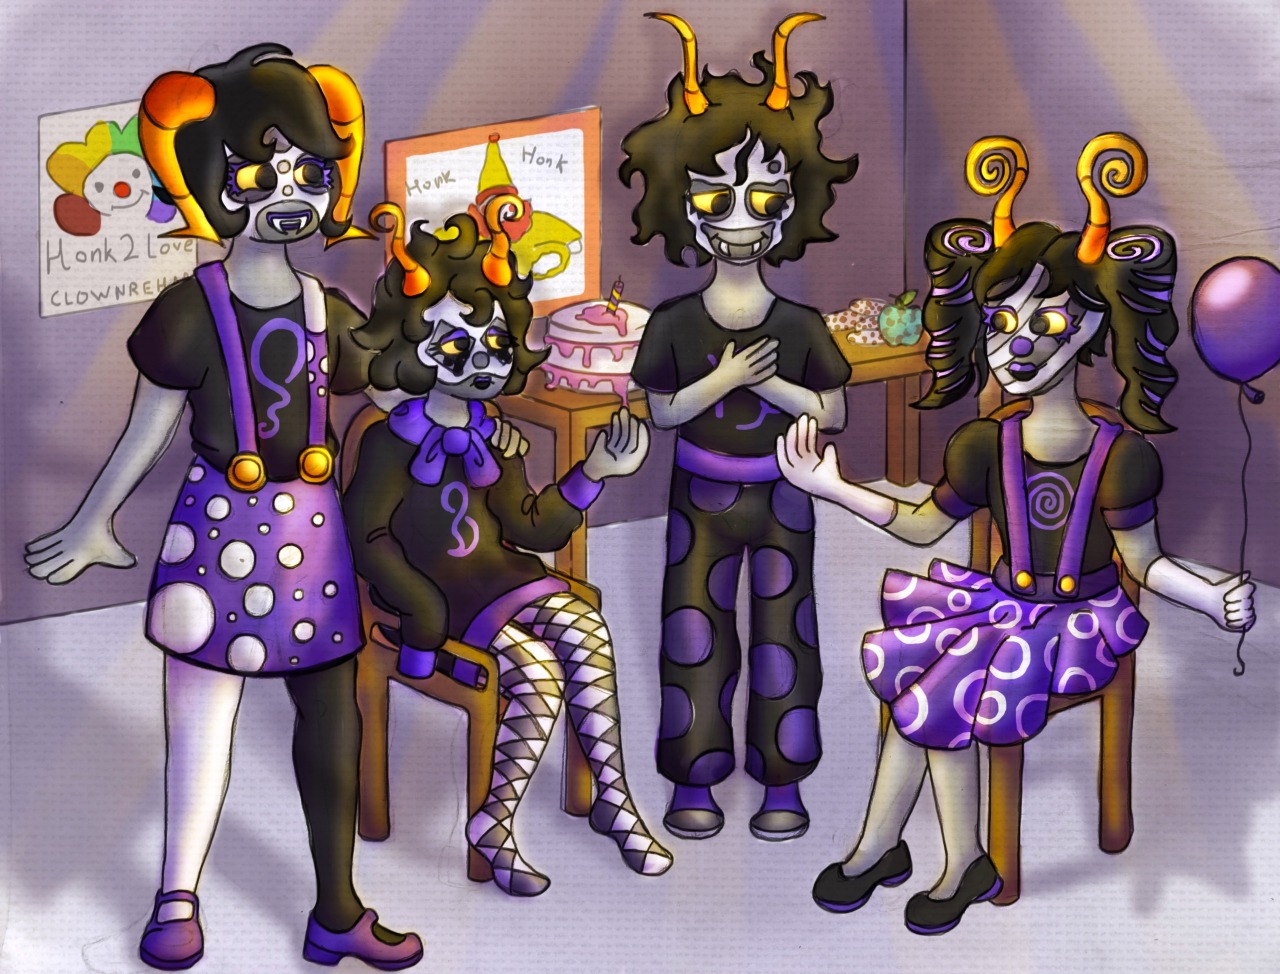 Welcome to clown rehab! Your group leader Gamzee will start the circle of grievances shortly.Oh, the joys of my hidden Homestuck folder. Every once in a while I rediscover it and go “ooh! art!”(Left to right: Edafia Algedi, Romery Misloc, Gamzee Makara, Erytha Alsort) #gamzee makara#homestuck#homestuck gamzee#gamzee homestuck#hs gamzee#hs ocs#homestuck oc#clown posting#clown art#homestuck fanart#homestuck ocs#gingermoth posts